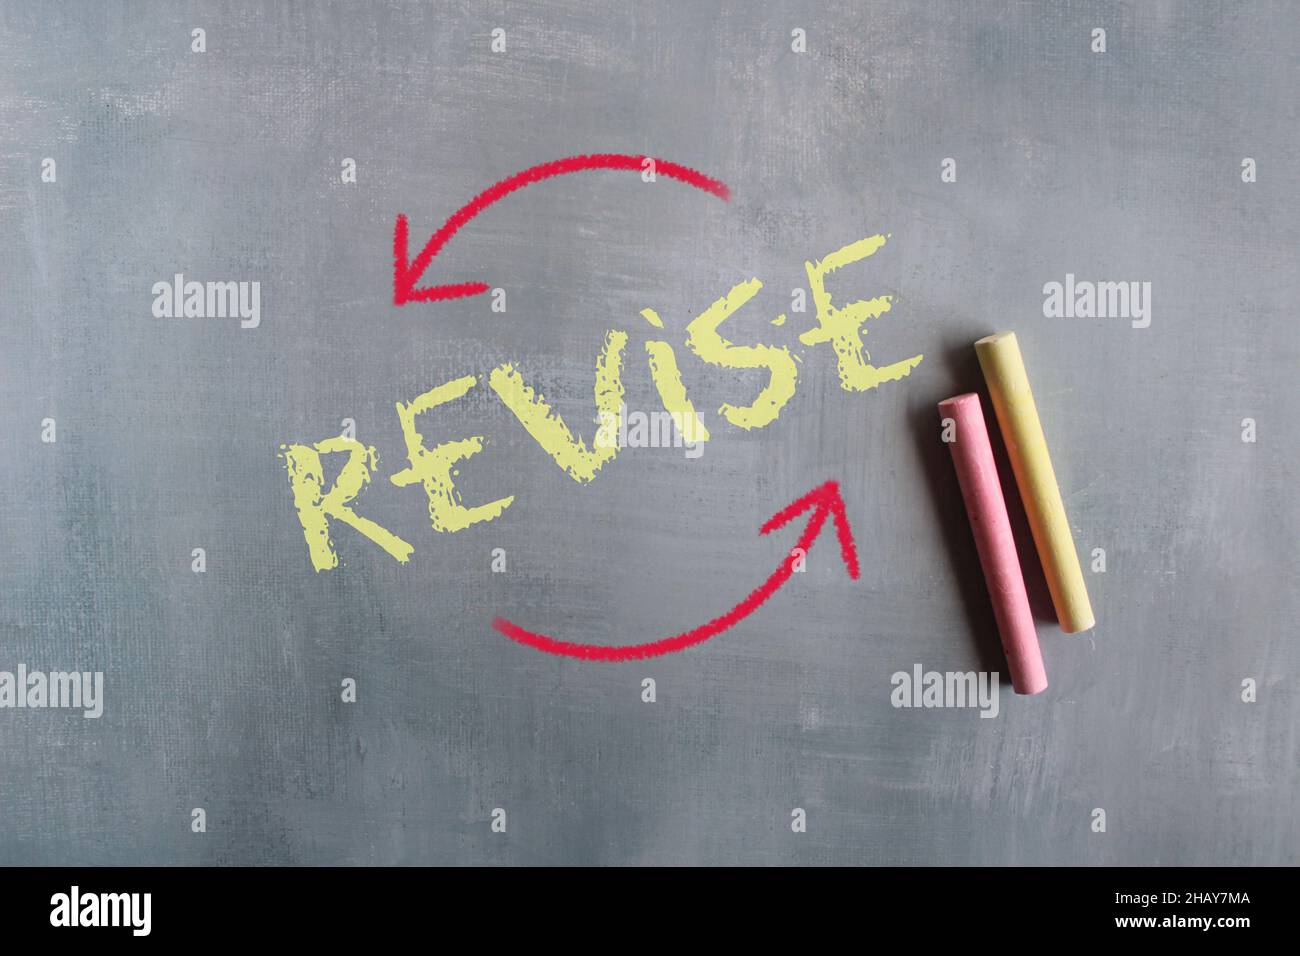 Chalkboard drawing image of arrow and text REVISE Stock Photo